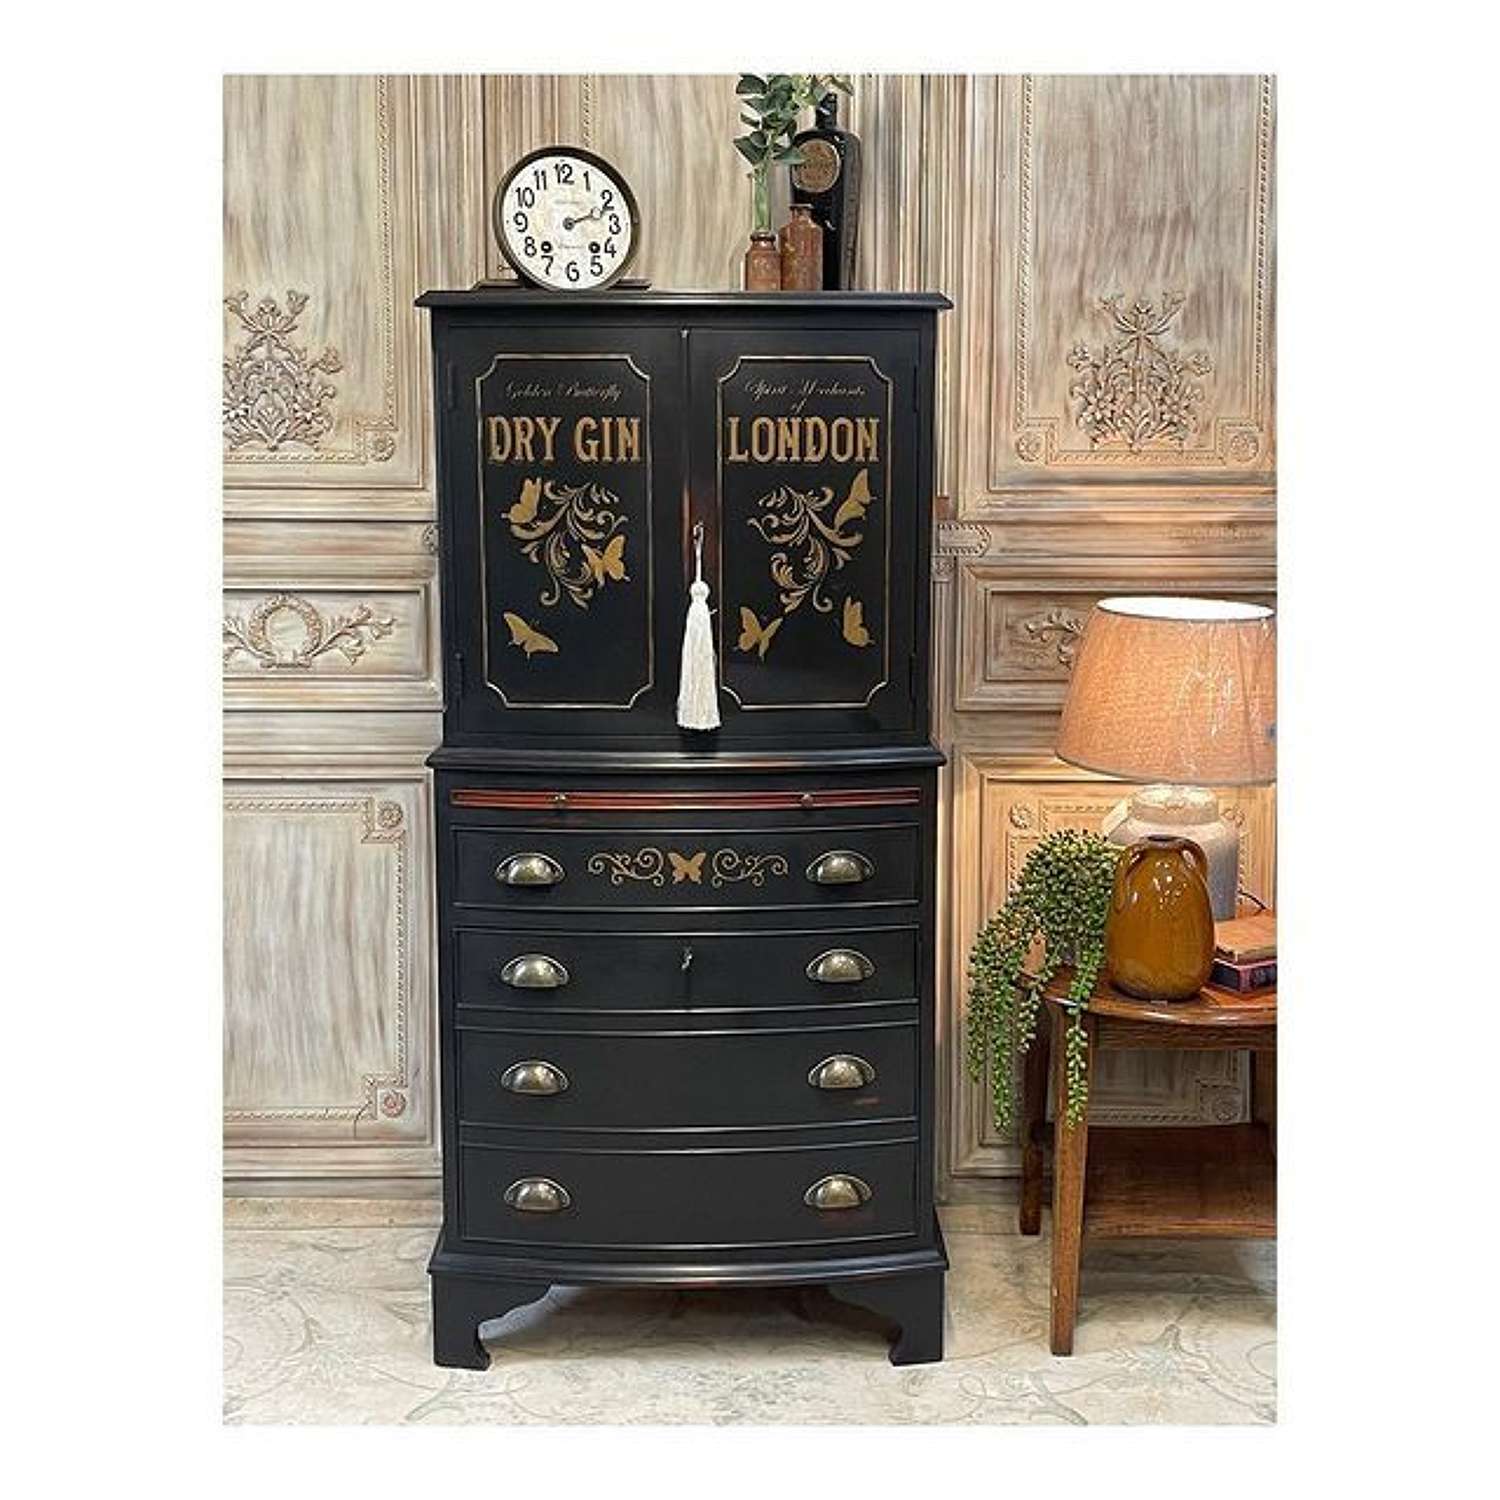 Hand painted drinks or cocktail cabinet